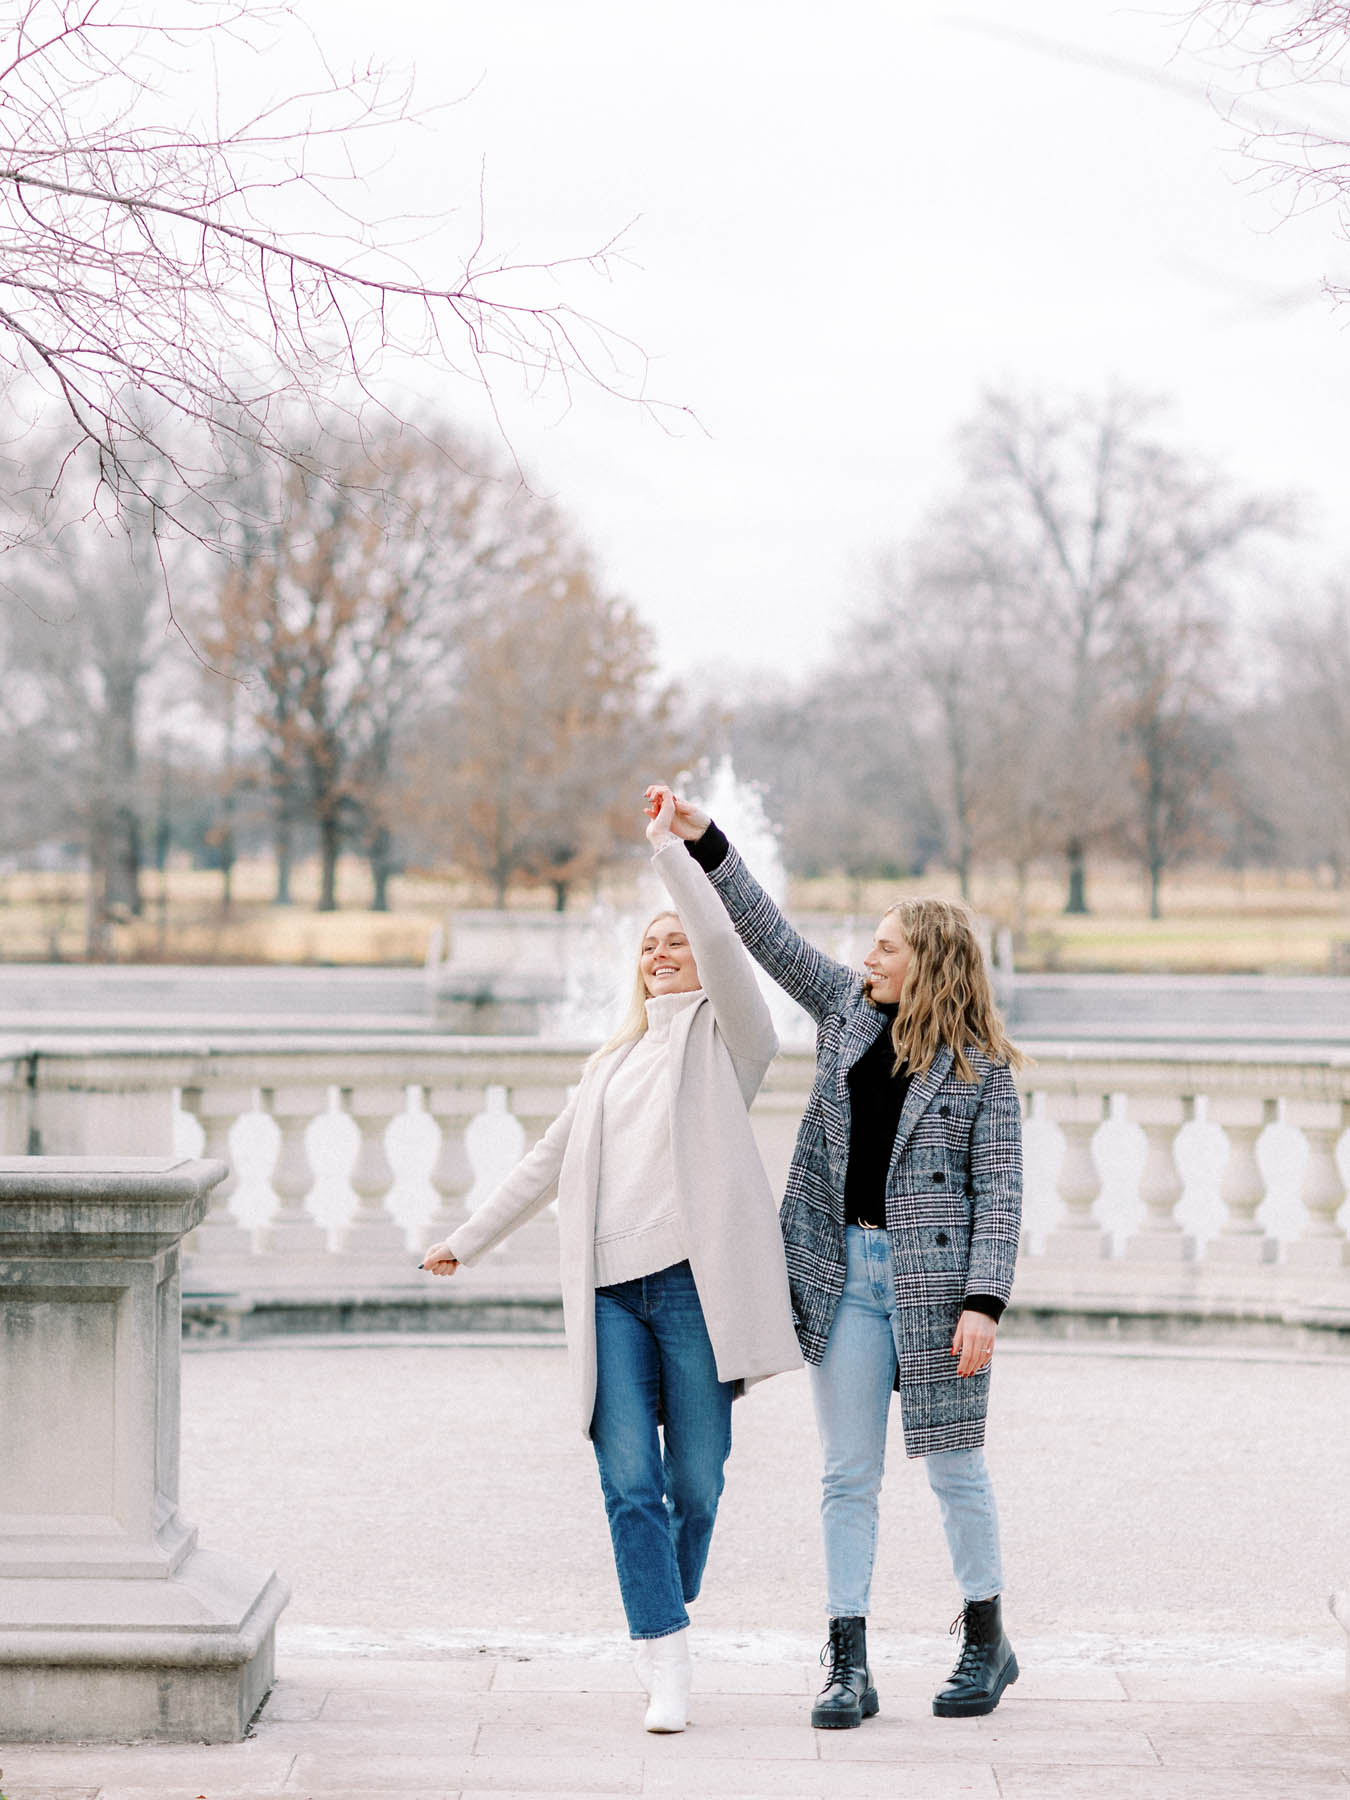 Two white people with blonde hair hold hands as one of them twirls in front of a marble and concrete fountain.